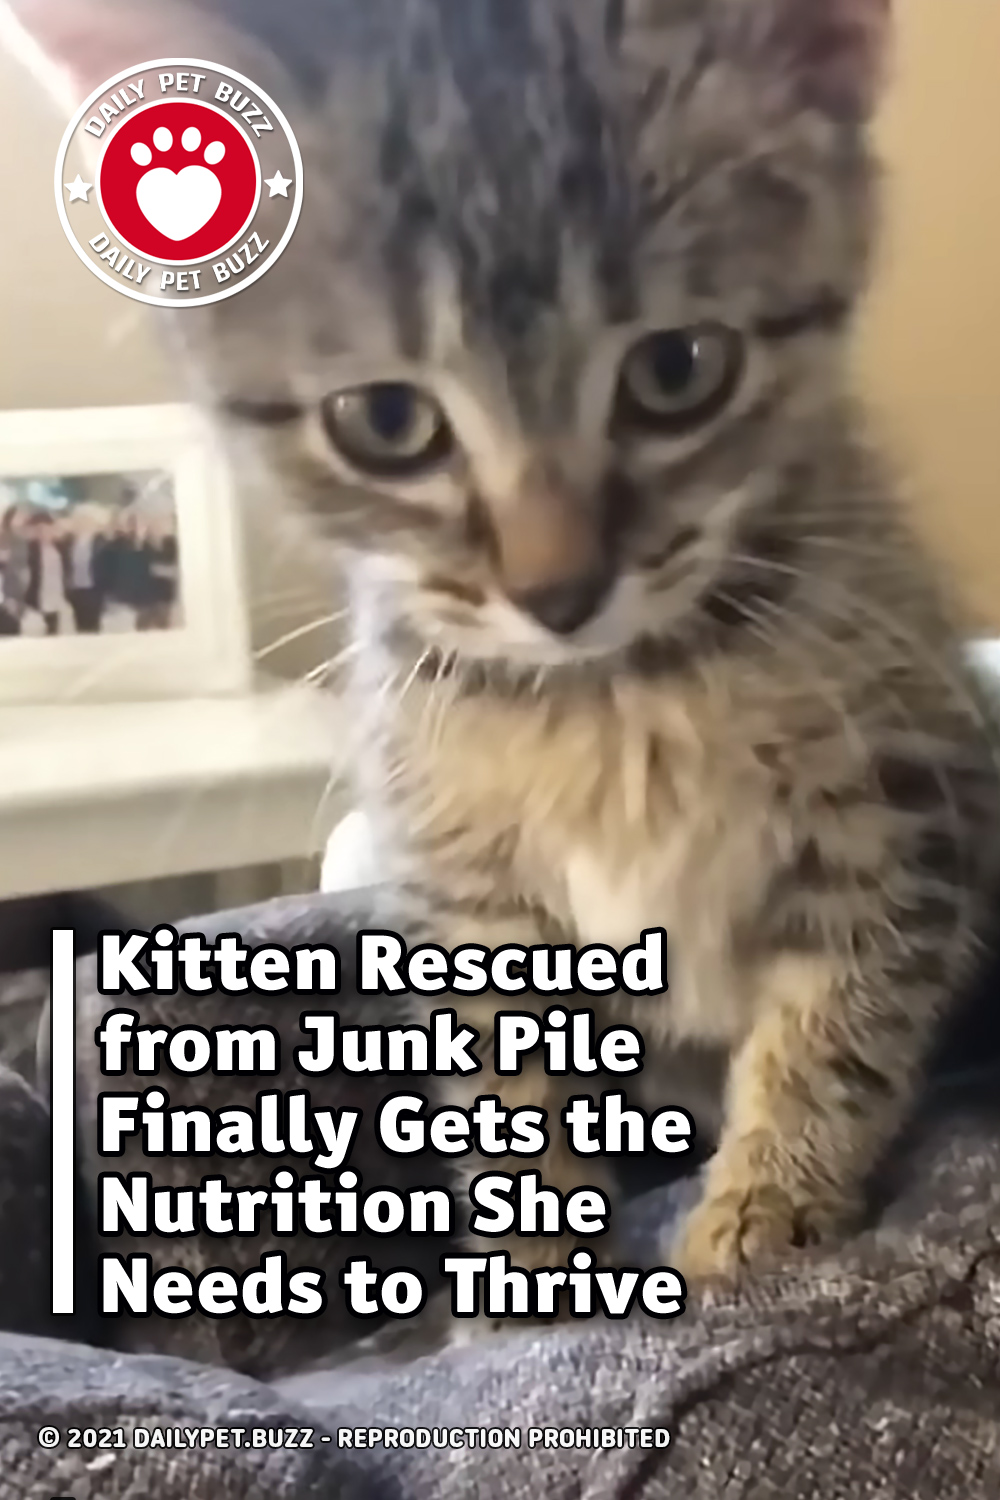 Kitten Rescued from Junk Pile Finally Gets the Nutrition She Needs to Thrive